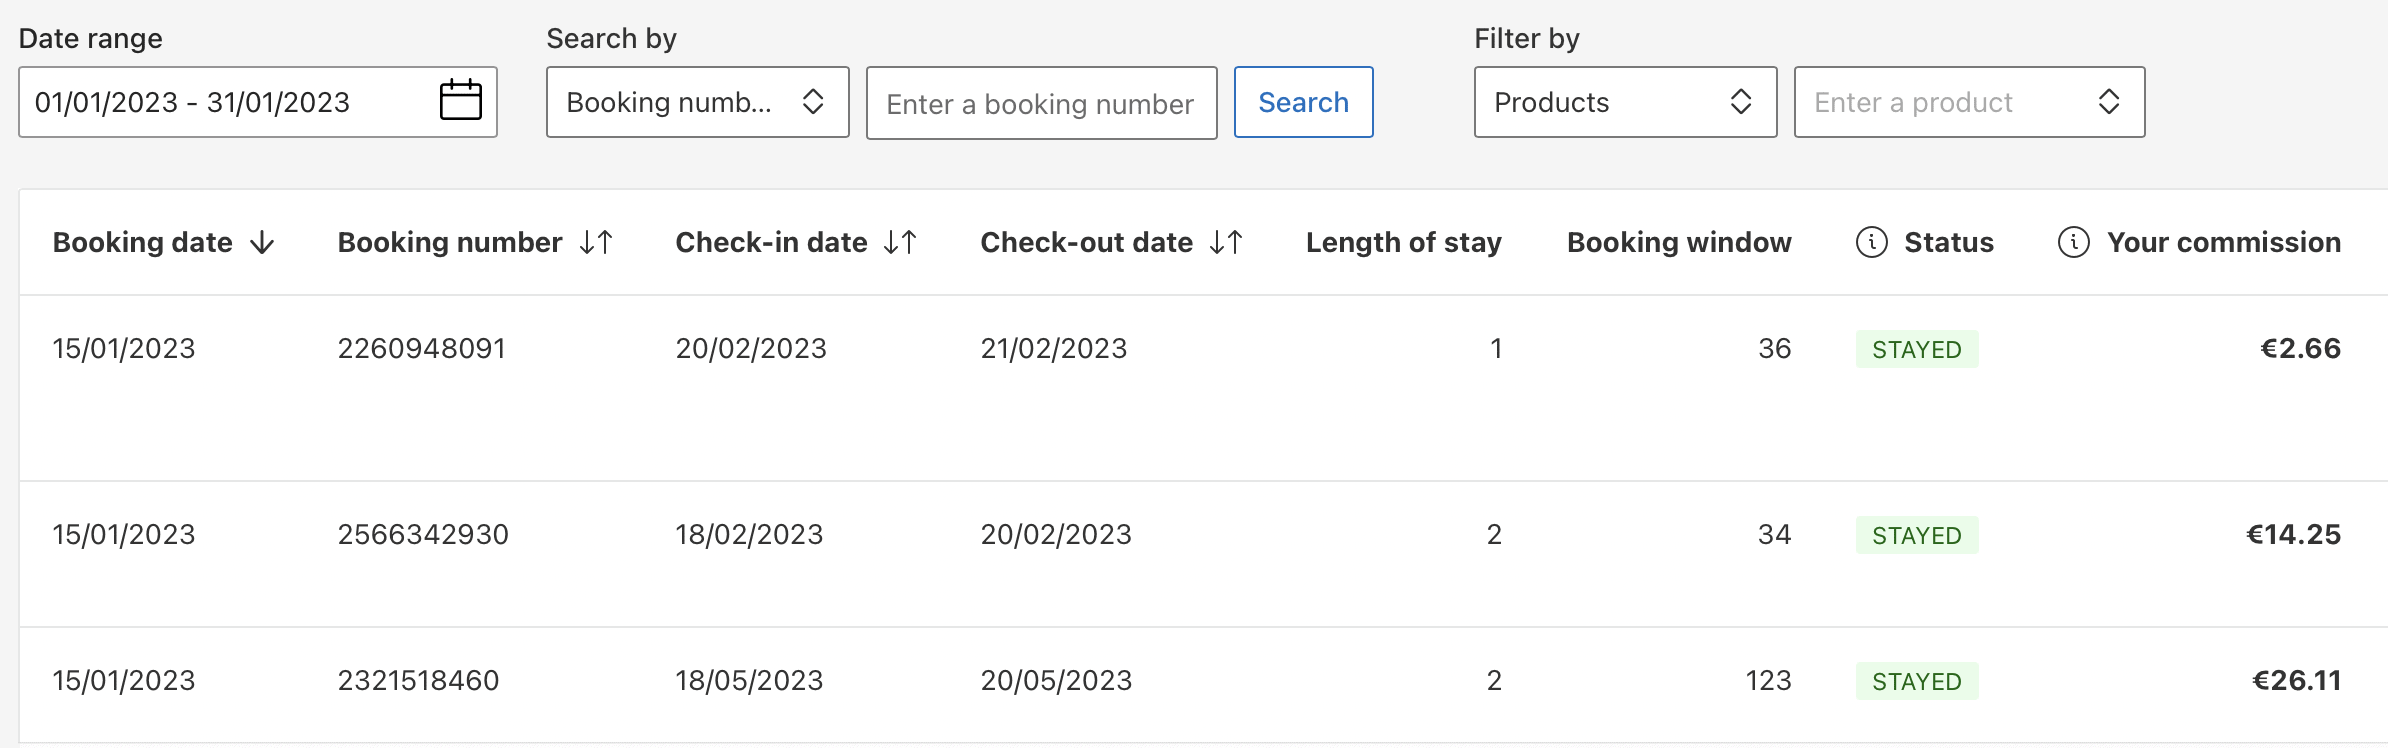 Screenshot of my affiliate dashboard inside Booking.com showing 3 bookings in January 2023.